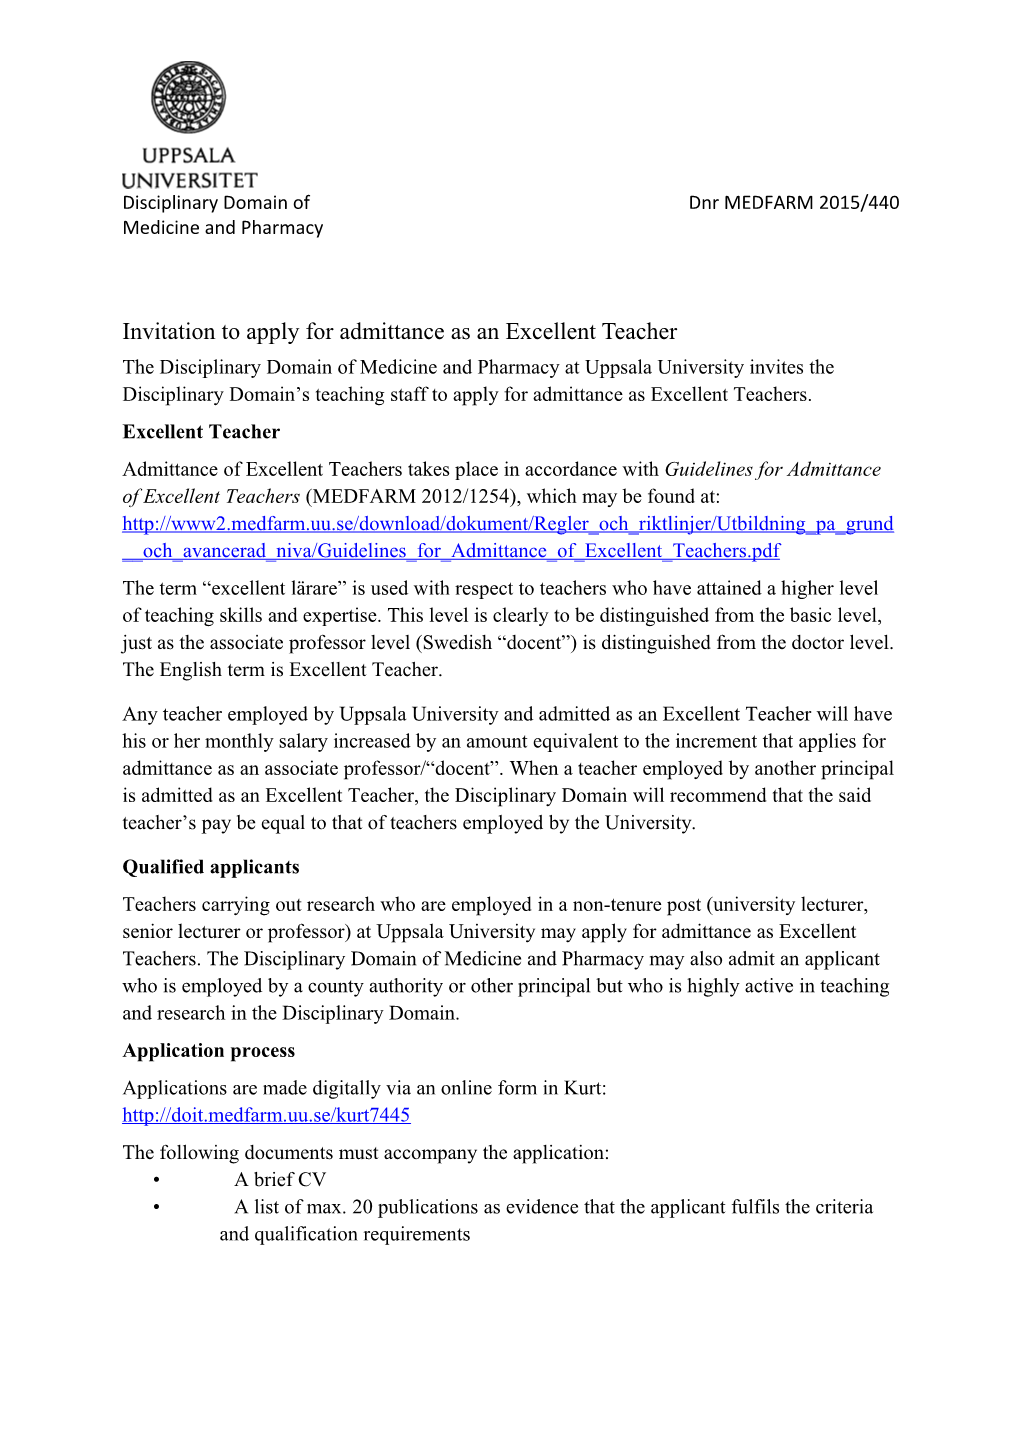 Invitation to Apply for Admittance As an Excellent Teacher